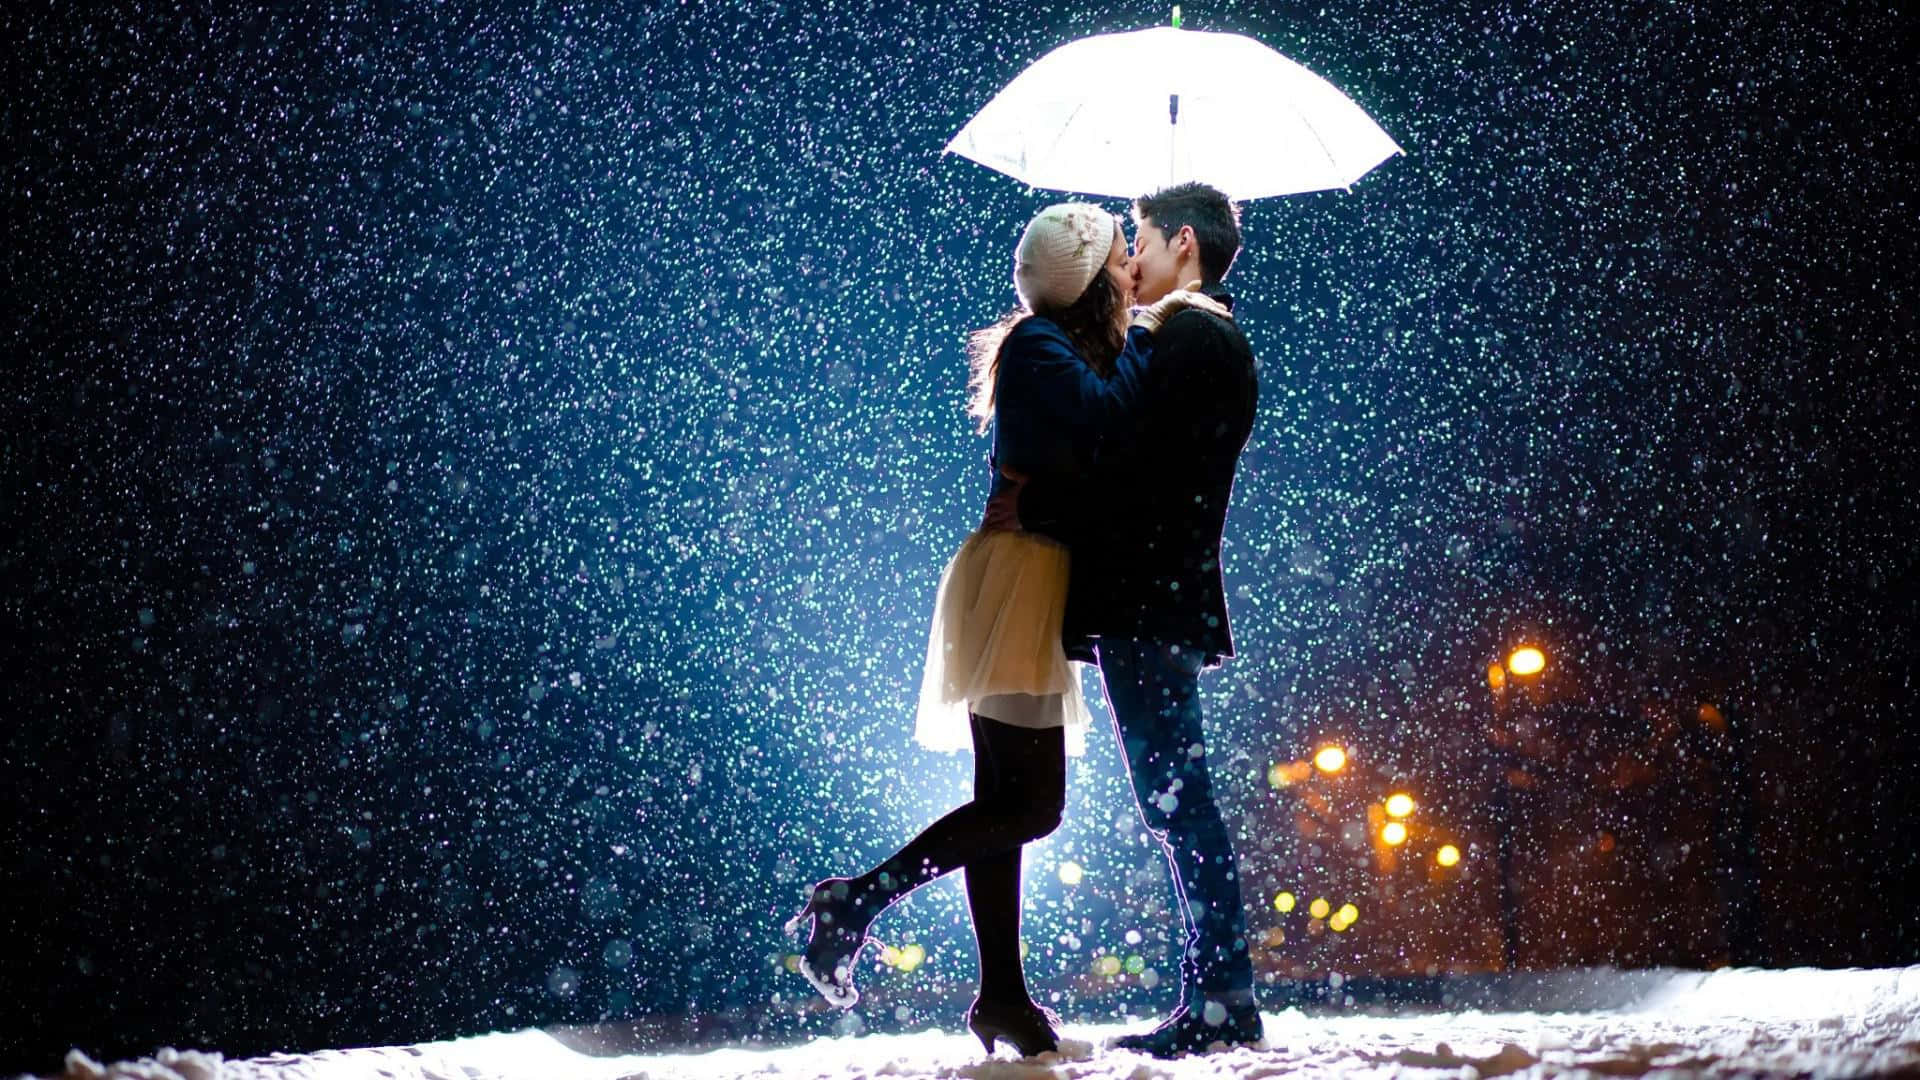 Love Kiss Couple Snowing Picture